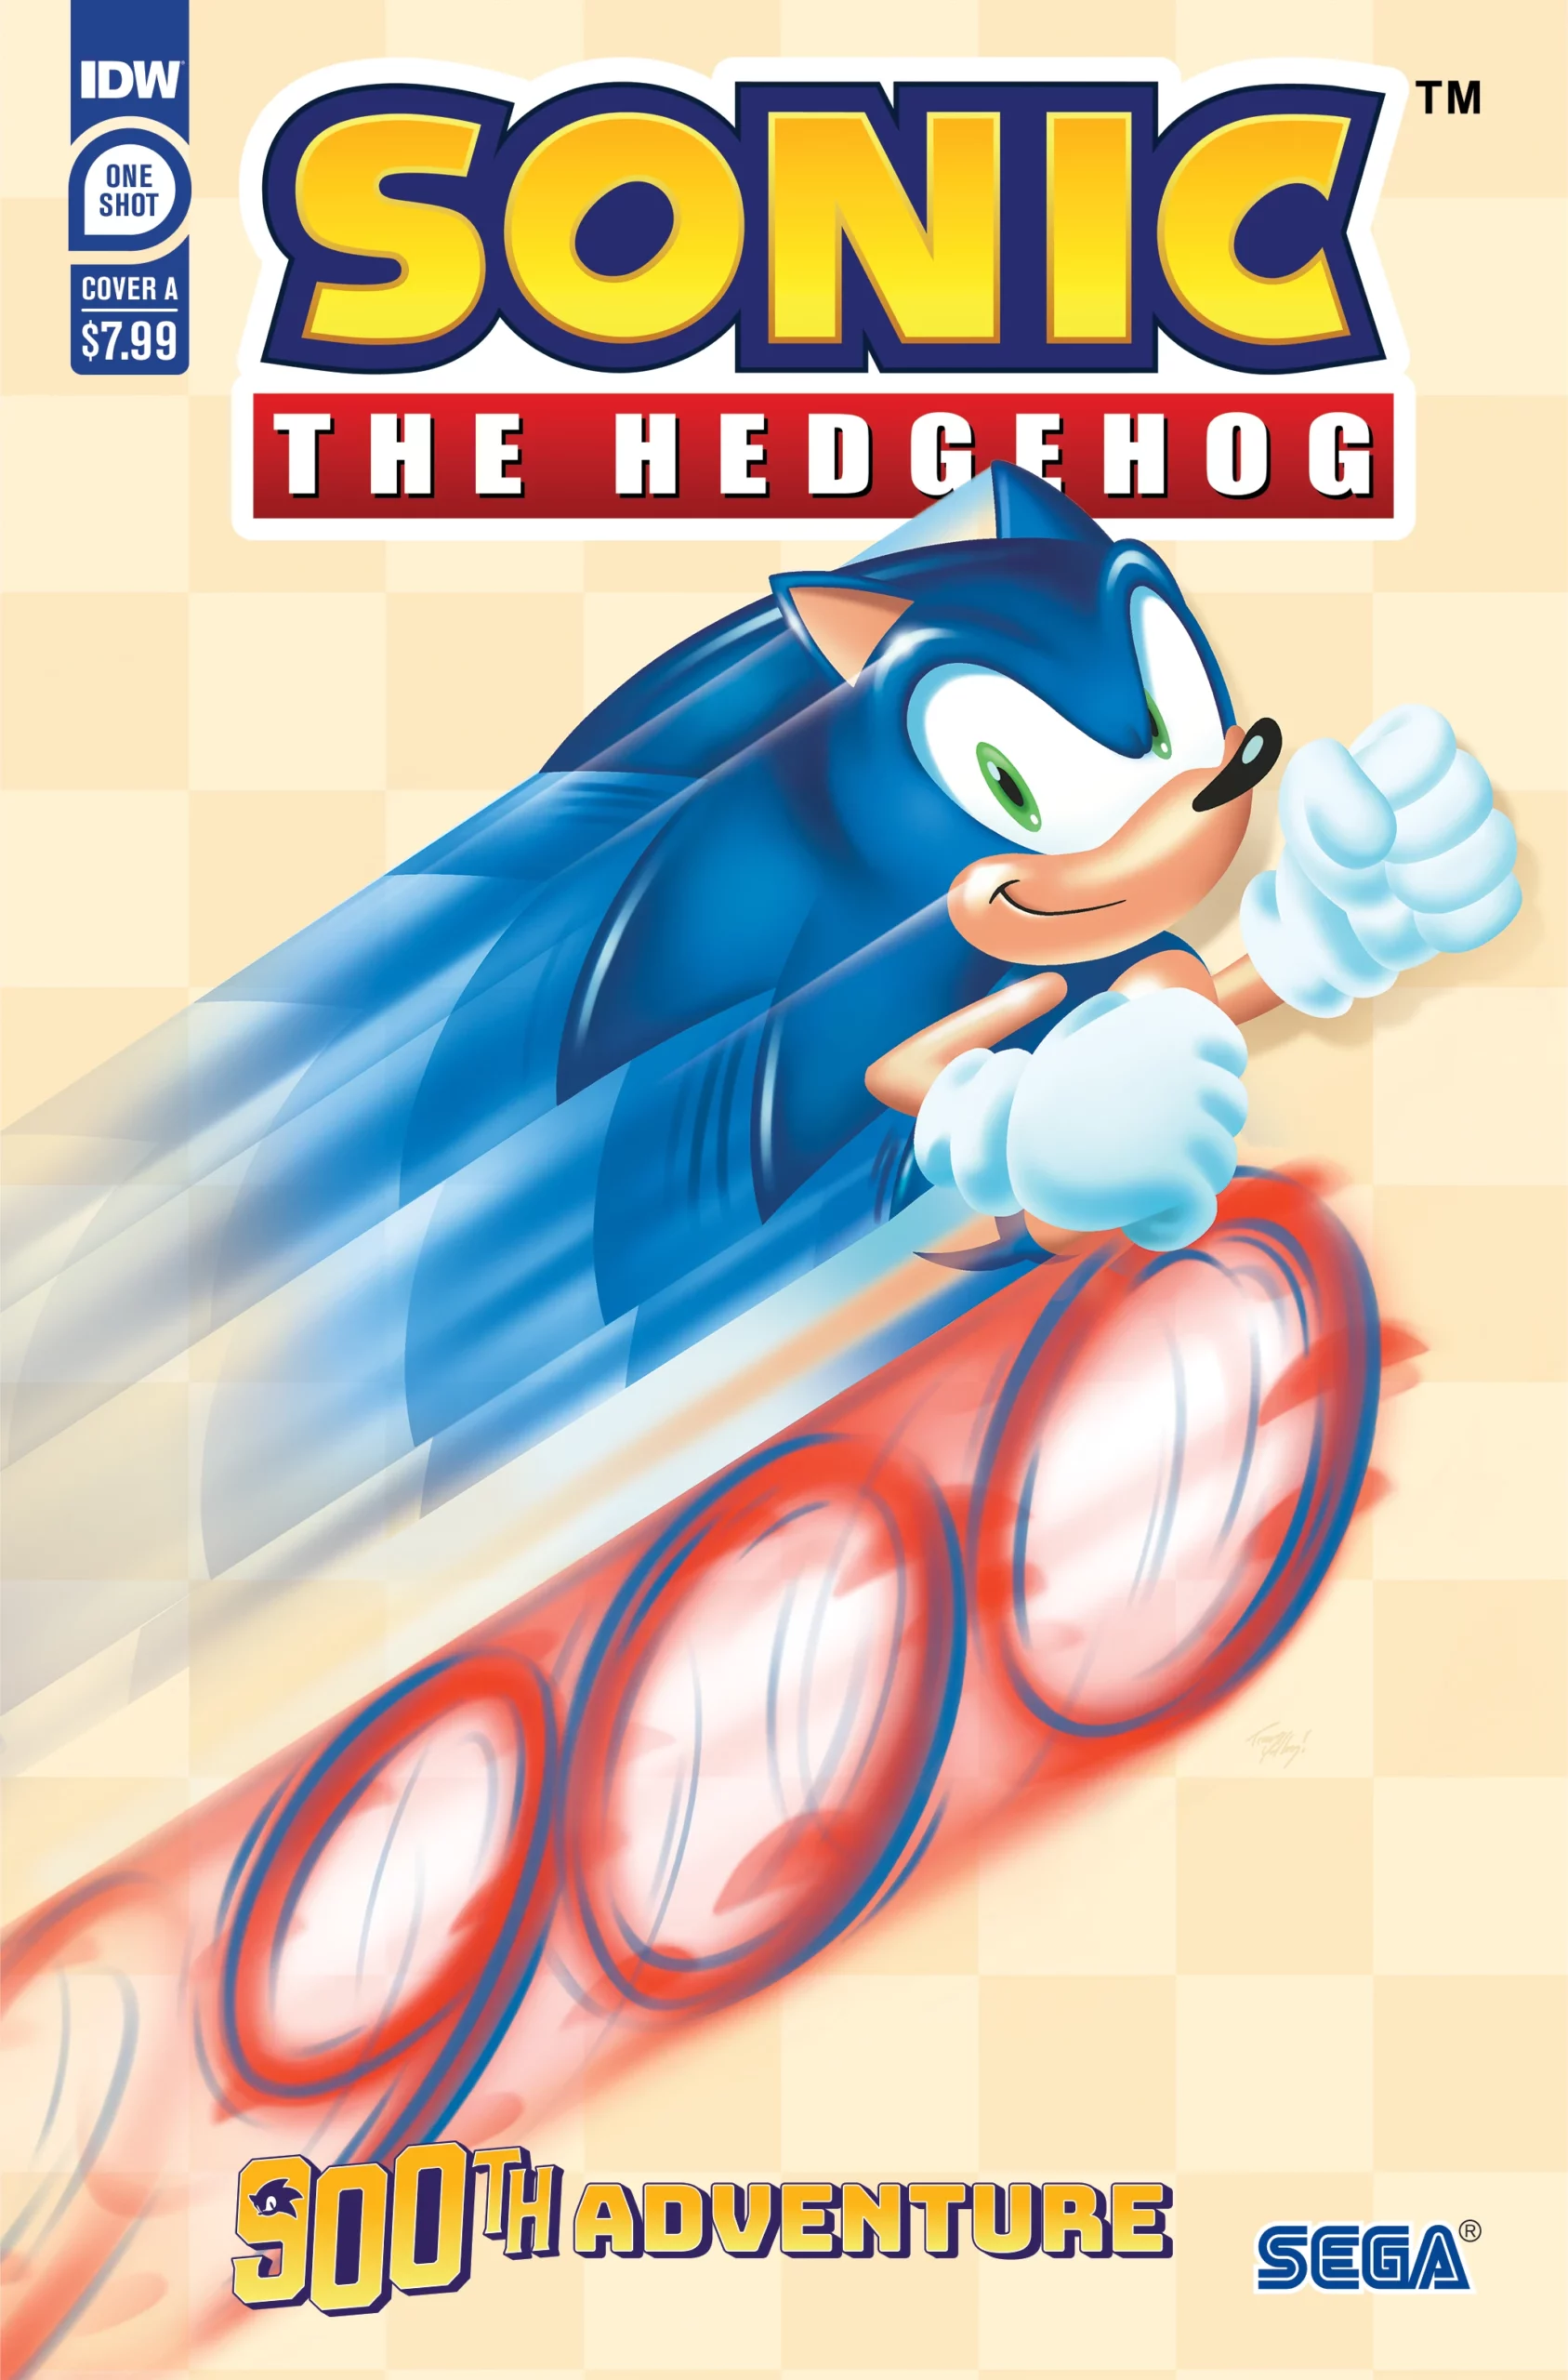 Sonic The Hedgehog 900th Adventure #1 one-shot IDW